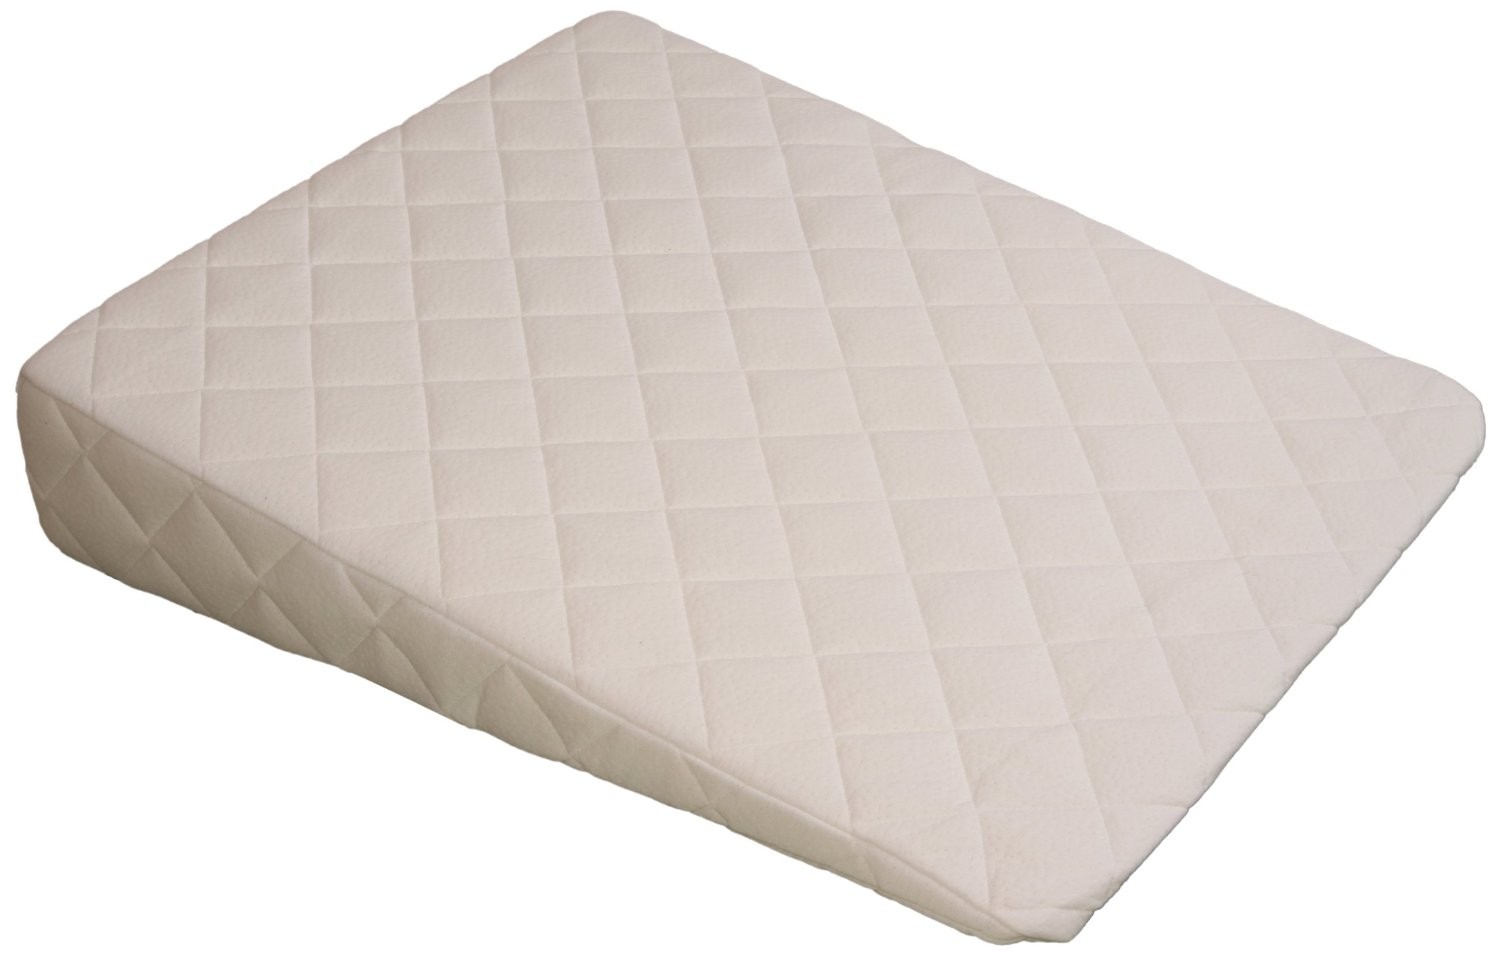 king size mattress wedge for acid reflux